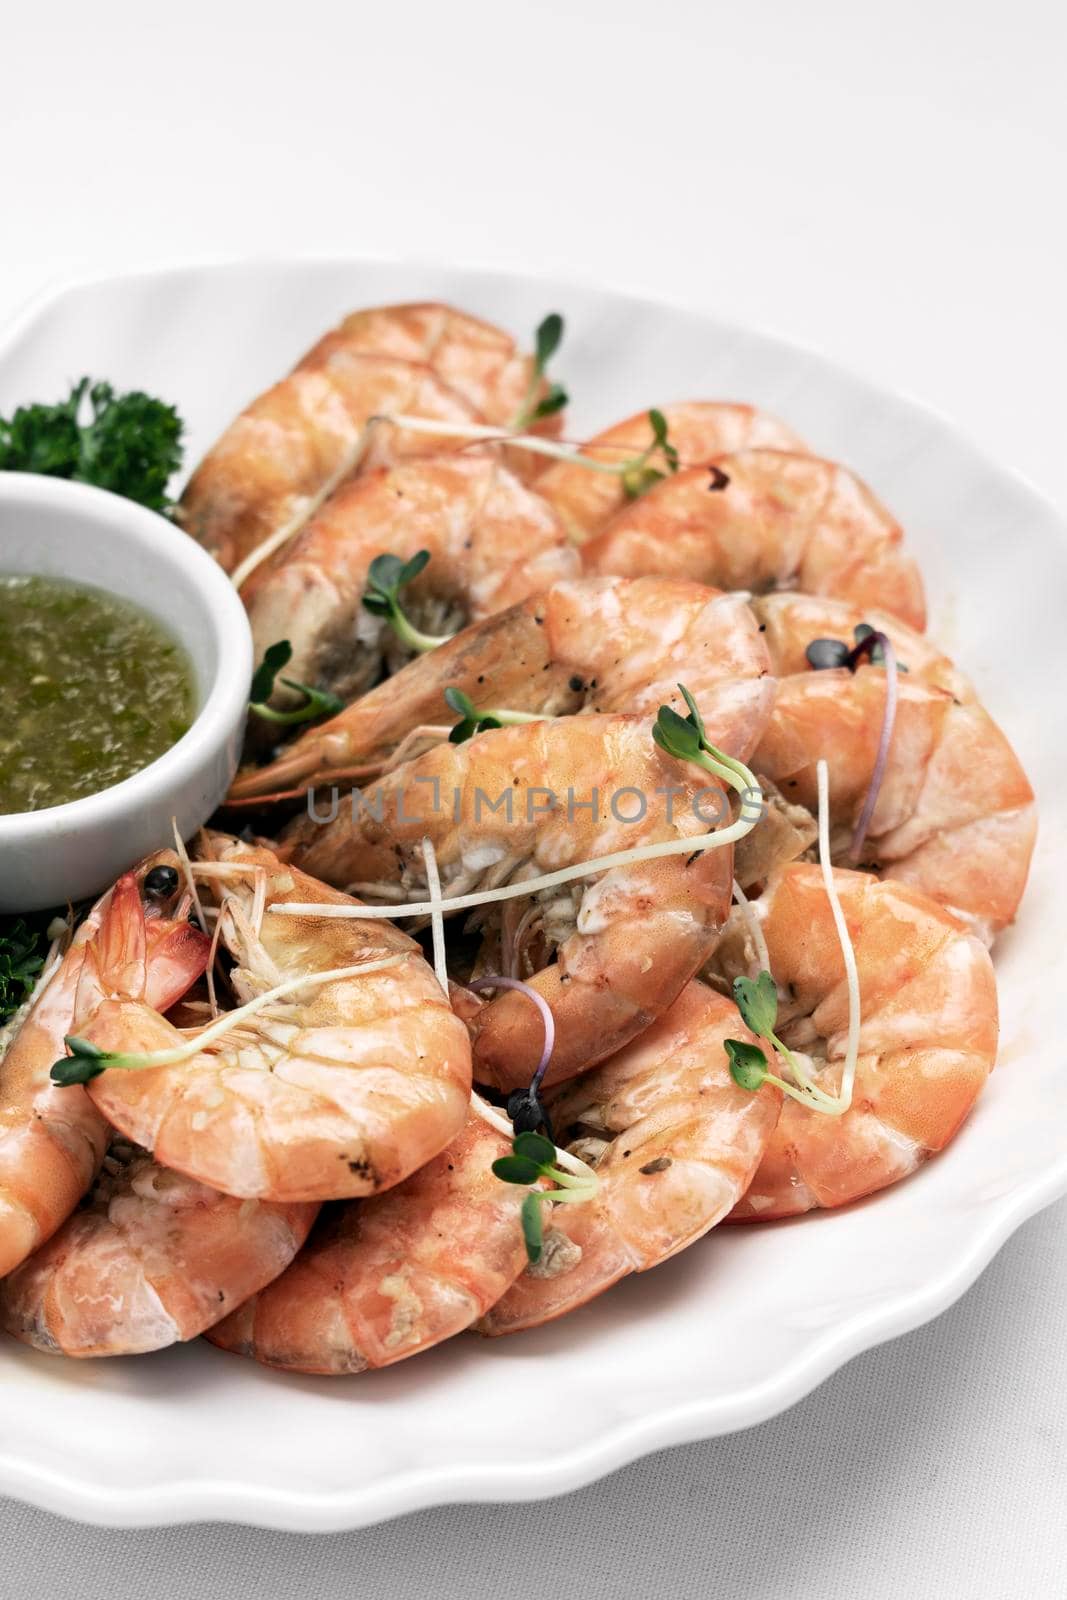 fresh boiled prawns with zesty citrus dipping sauce
 by jackmalipan